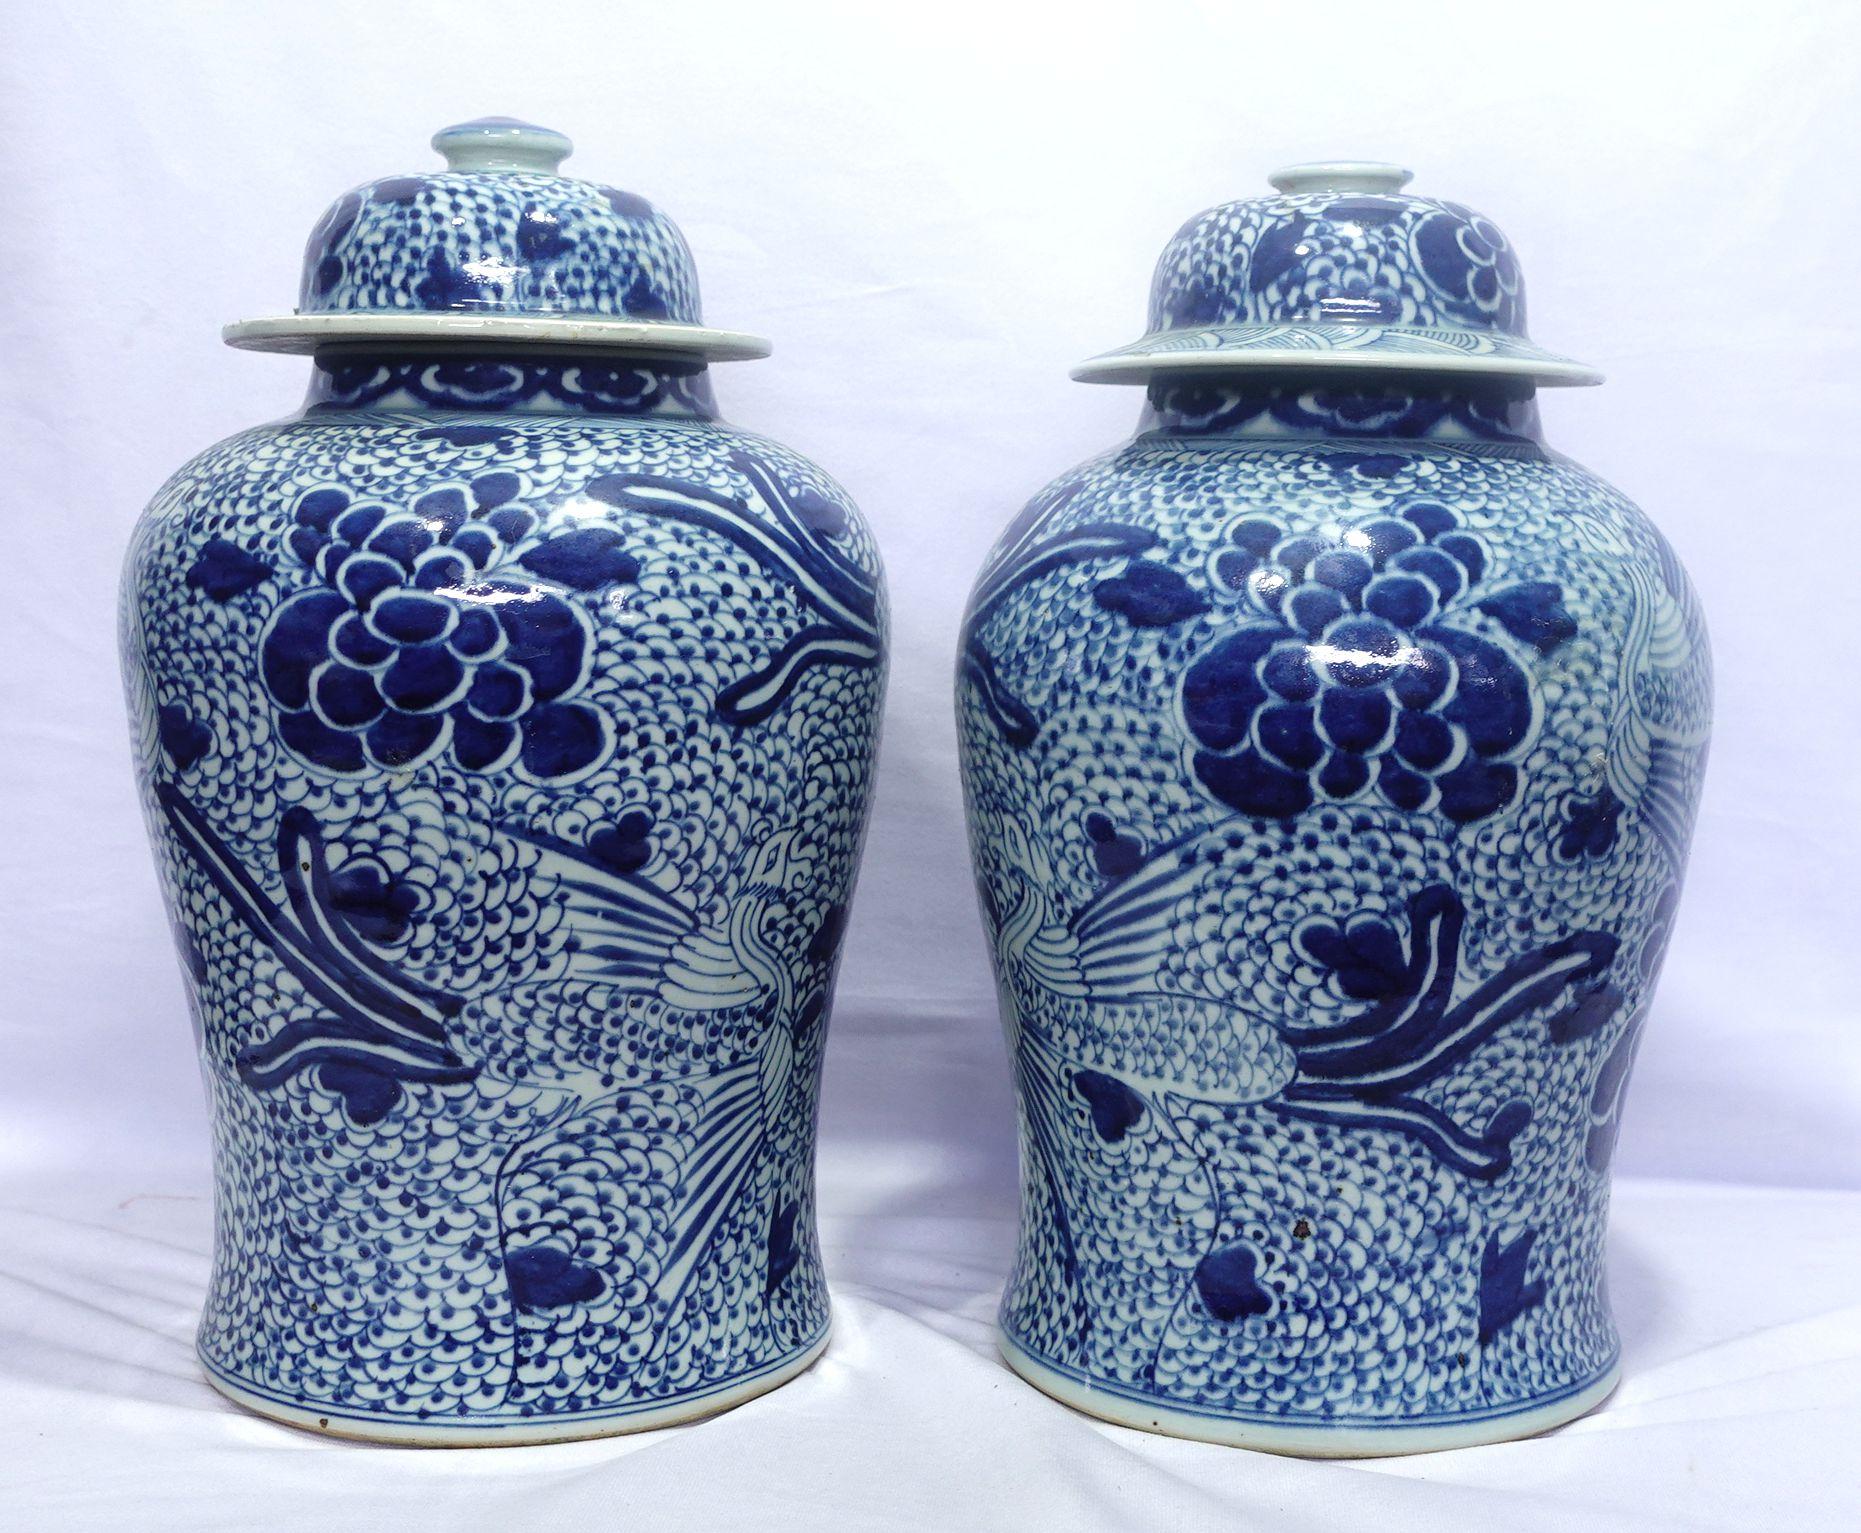 This is a large pair of porcelain Temple Jars with the original lids. The theme is dominated by the symbolic patterns of phoenixes and peonies presenting a luxurious rich life and noble reputation. They are dated from the 19th century. They are